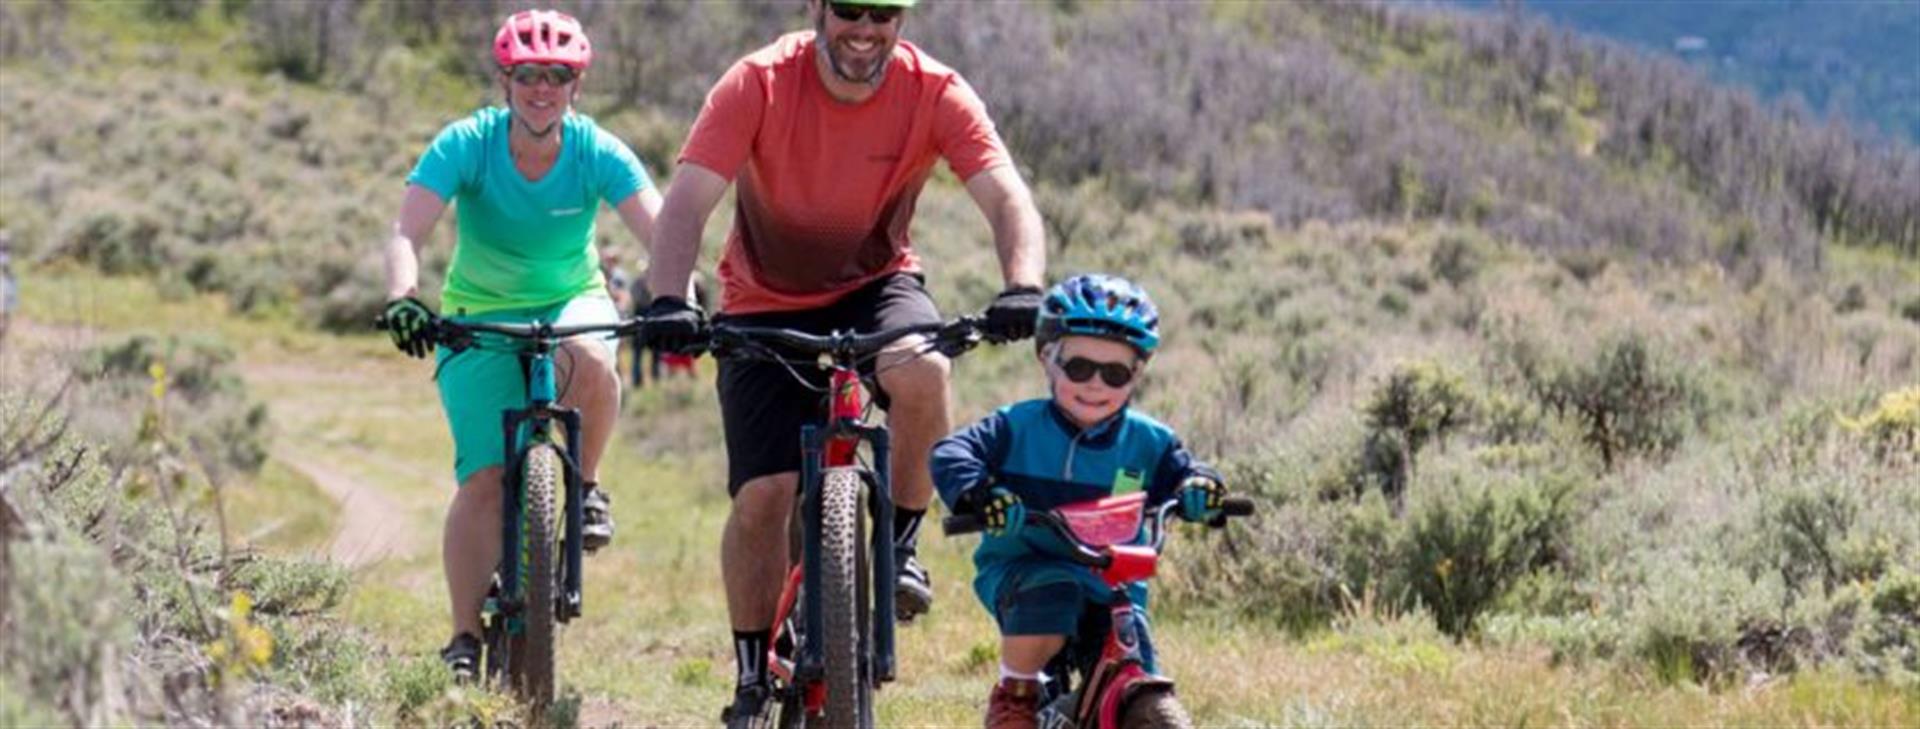 A mom, dad, and son on mountain bikes, coming down a single track through sage brush and grassland